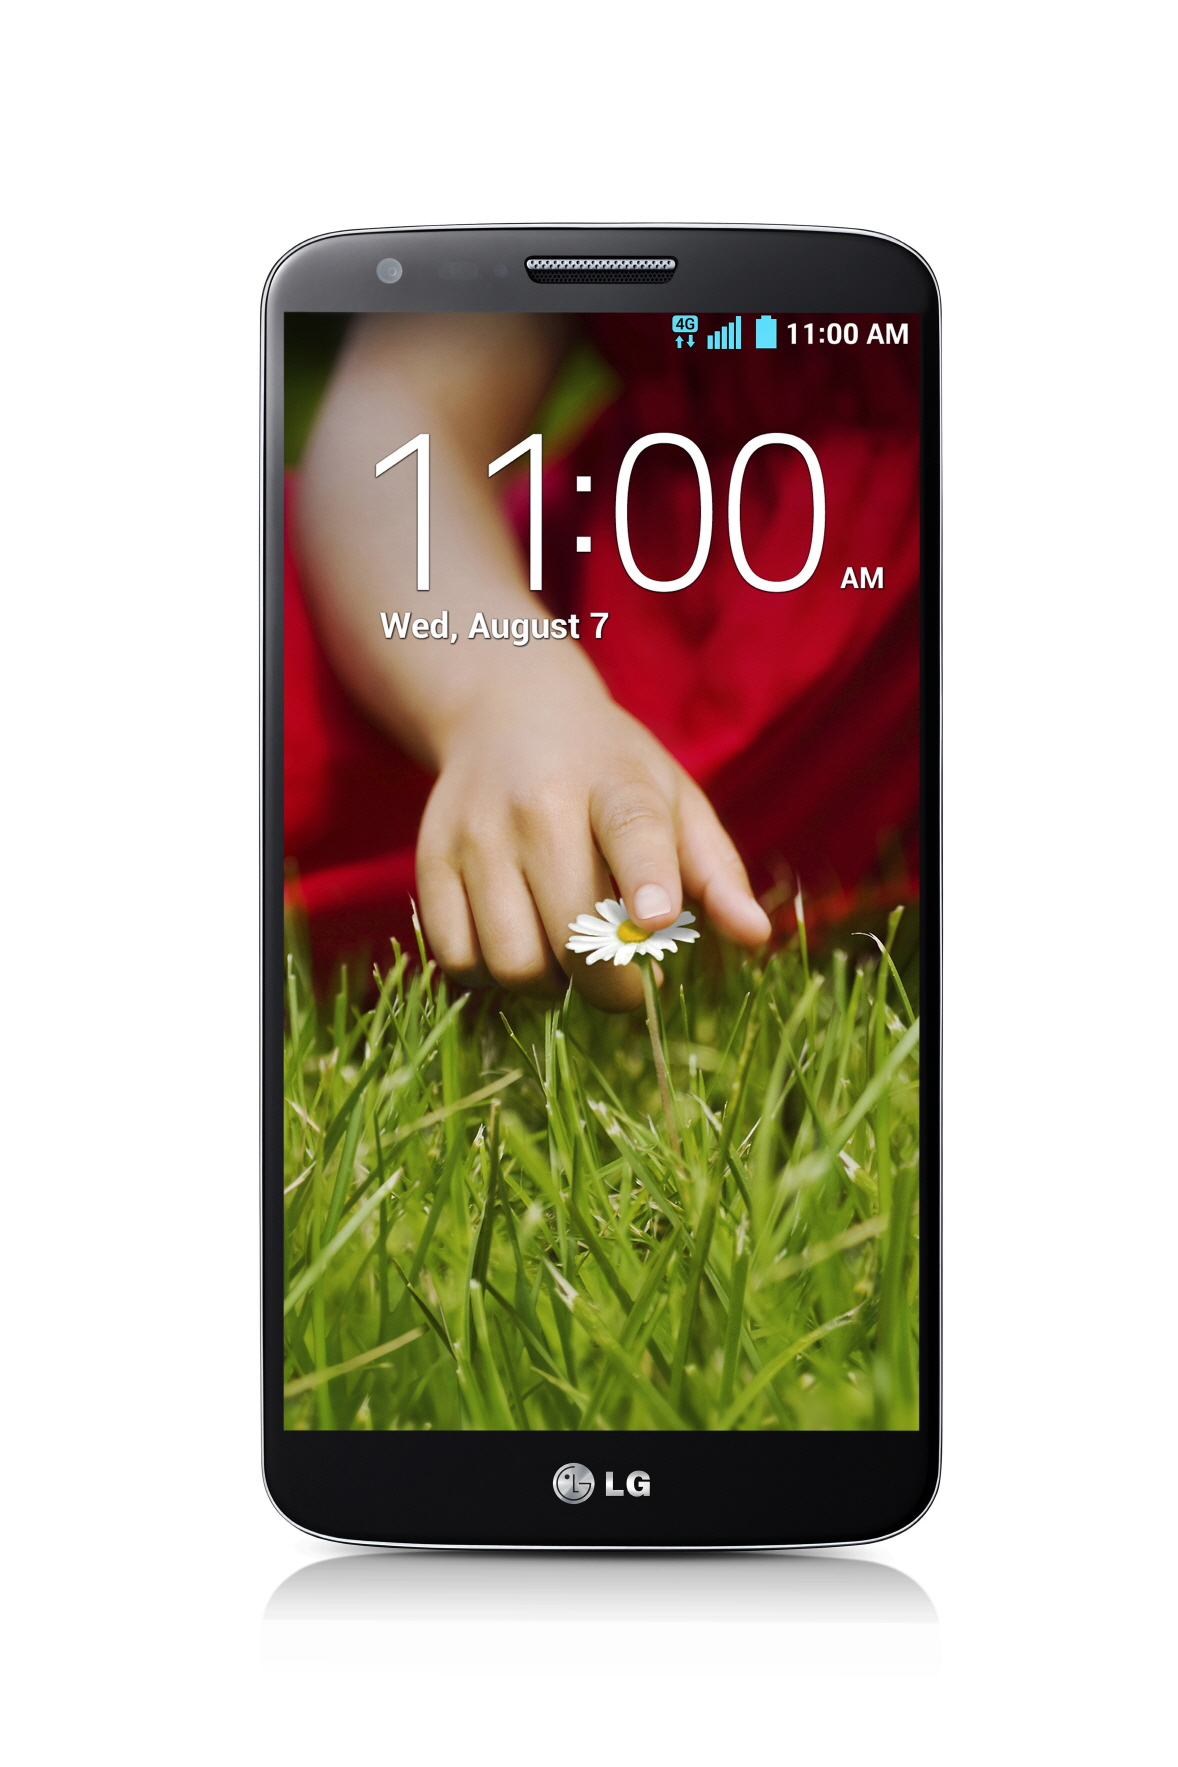 A front view of LG G2.